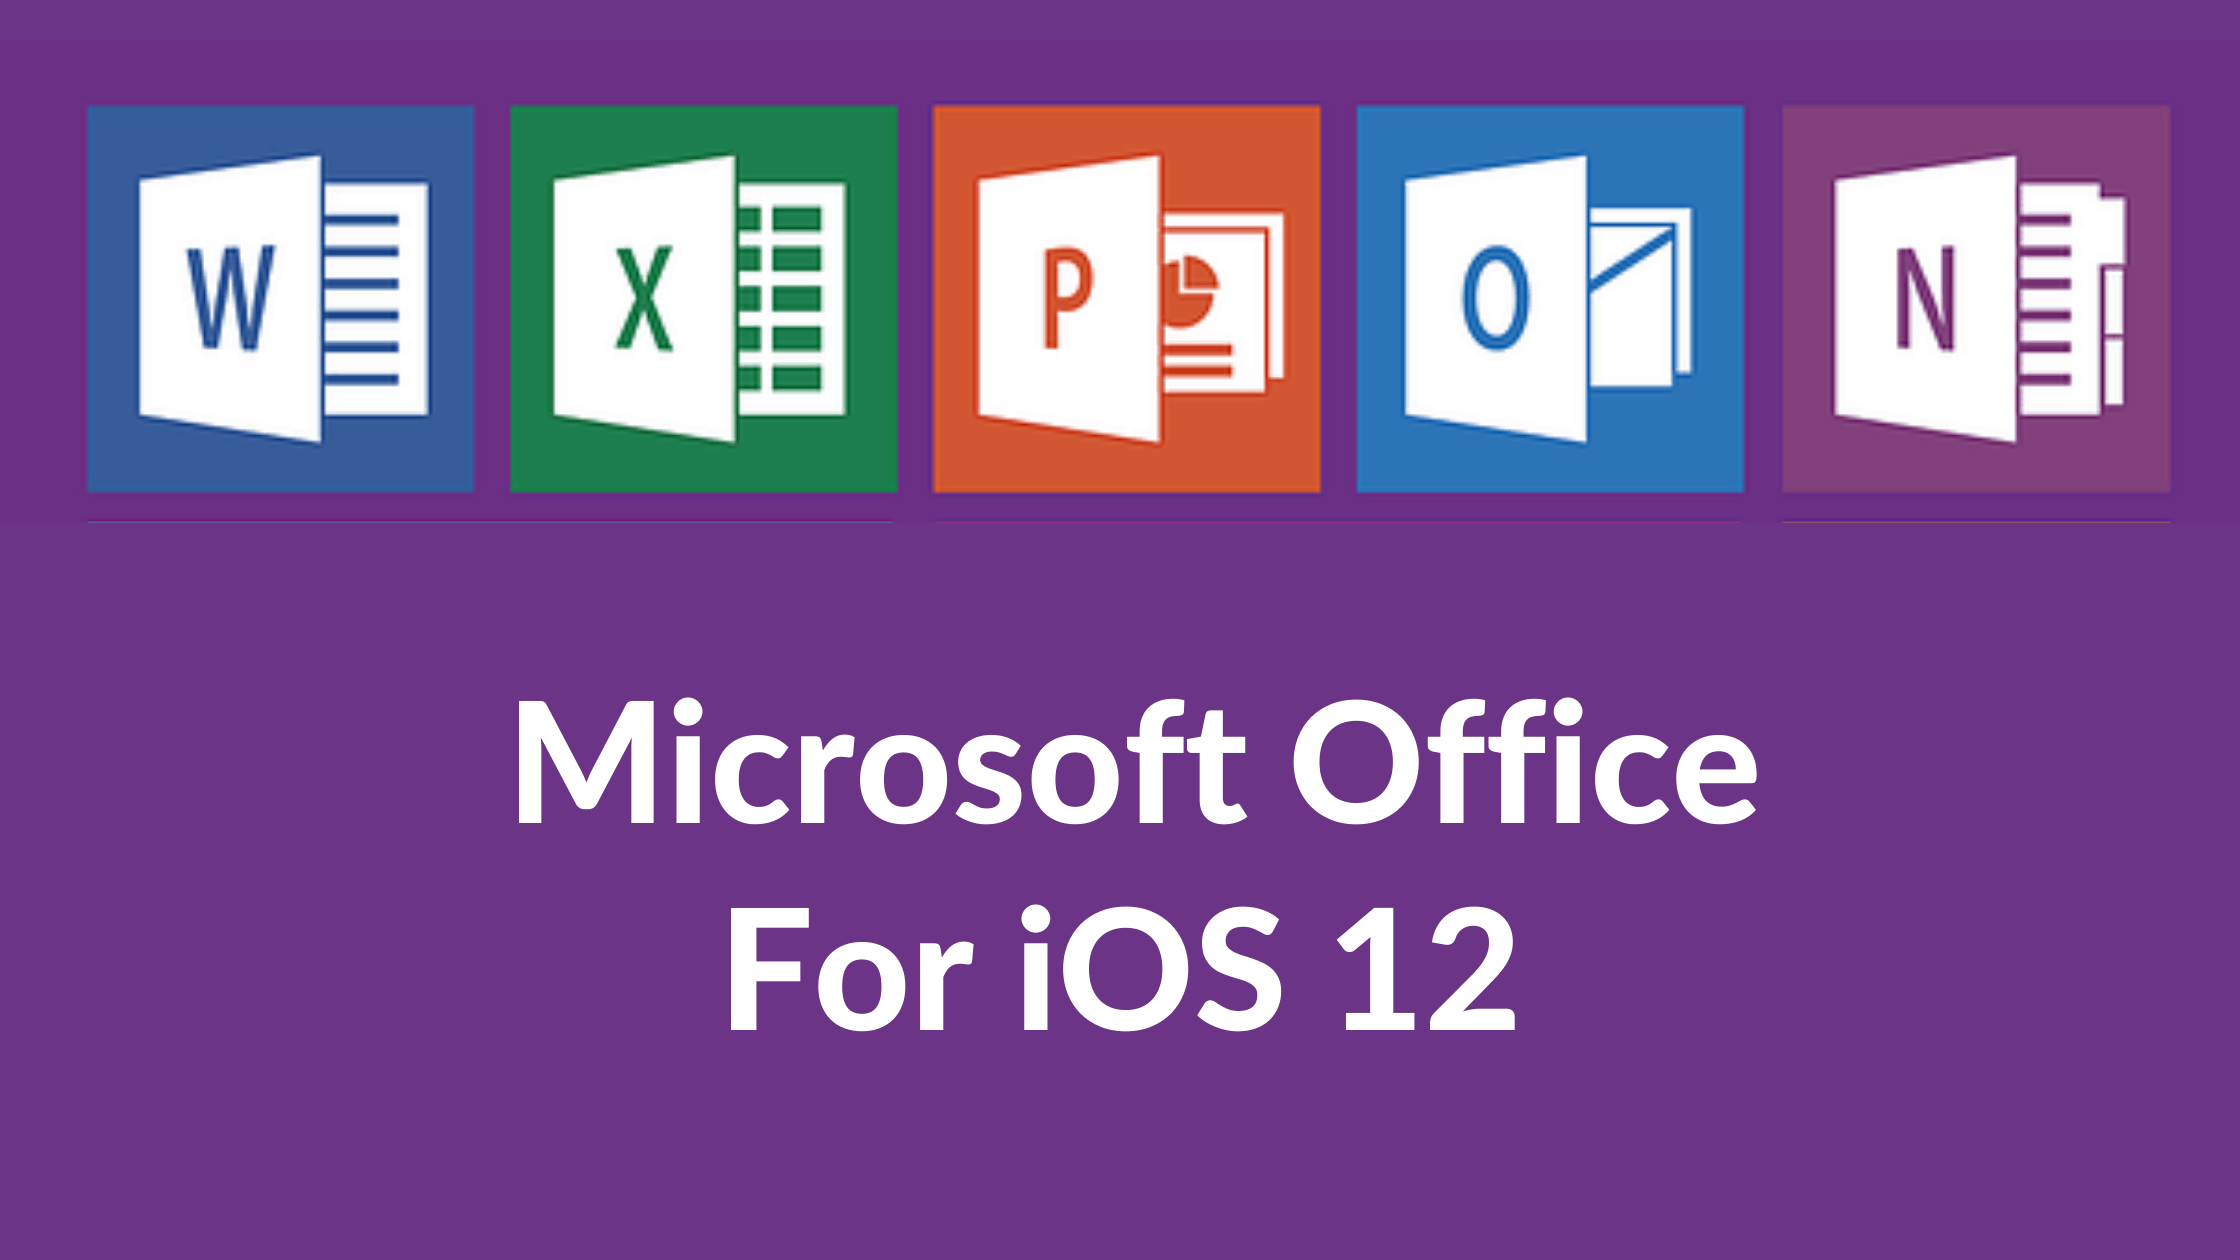 Microsoft Office for iOS 12.5.2 iPhone 5s,6, and 6 Plus